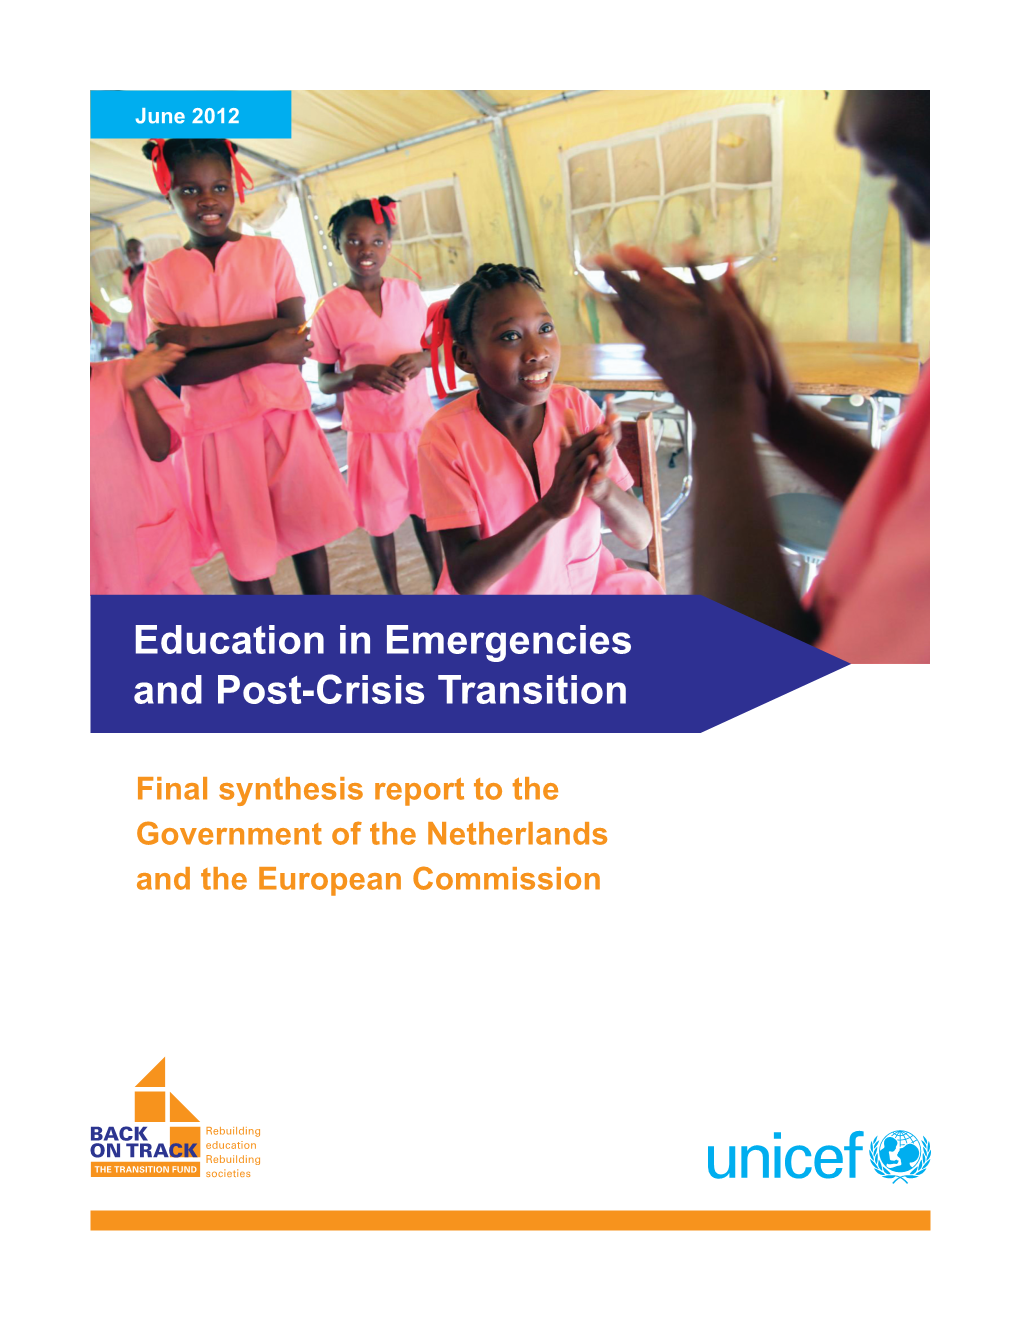 Education in Emergencies and Post-Crisis Transition